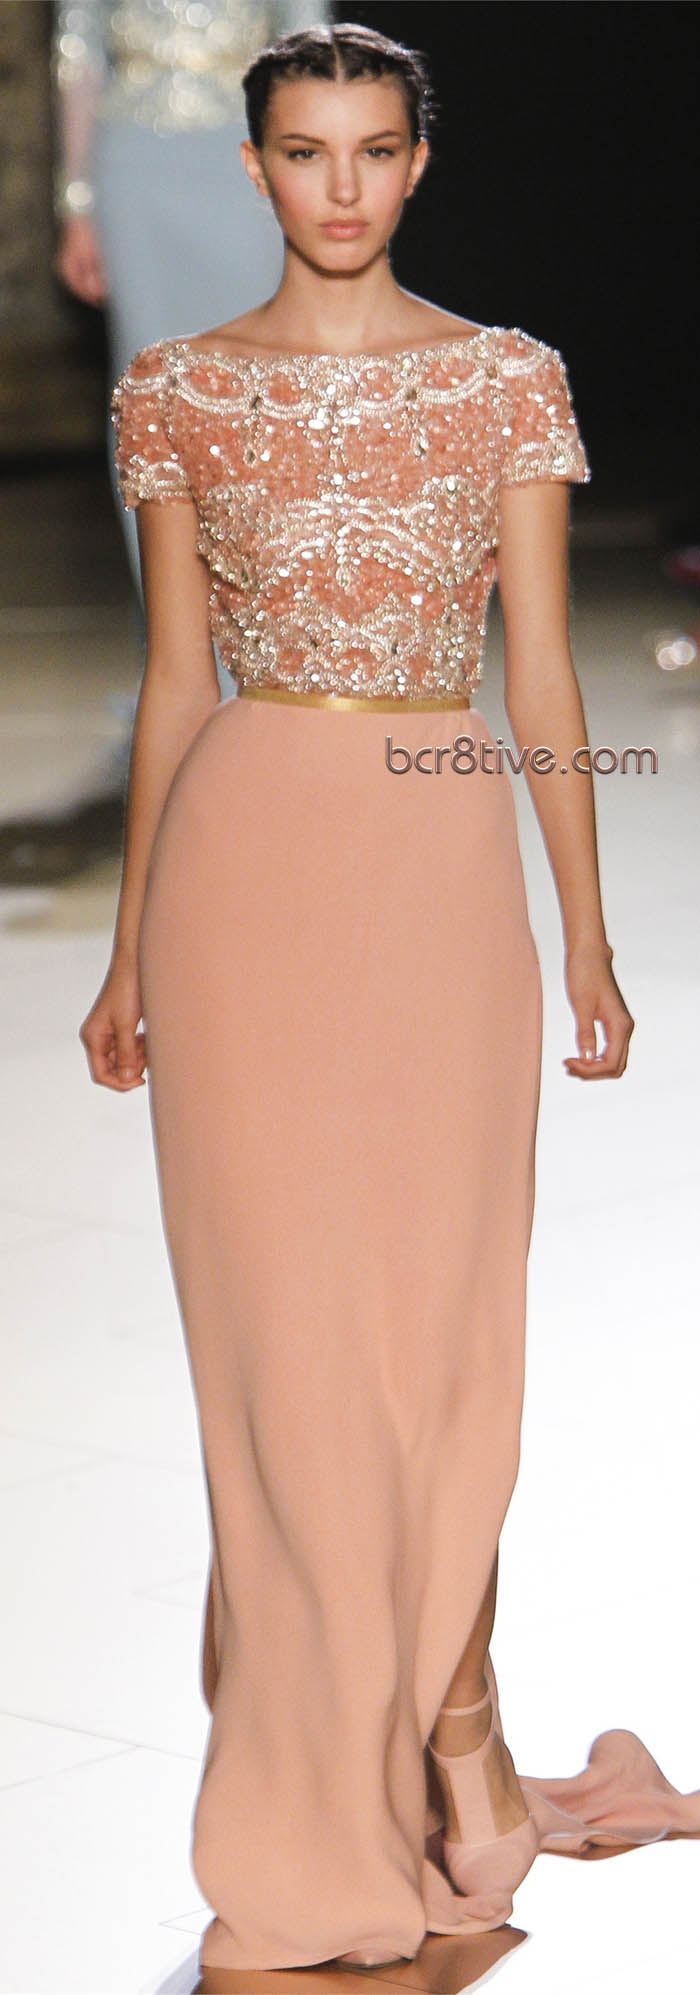 Elie Saab Couture Fall Winter 2012